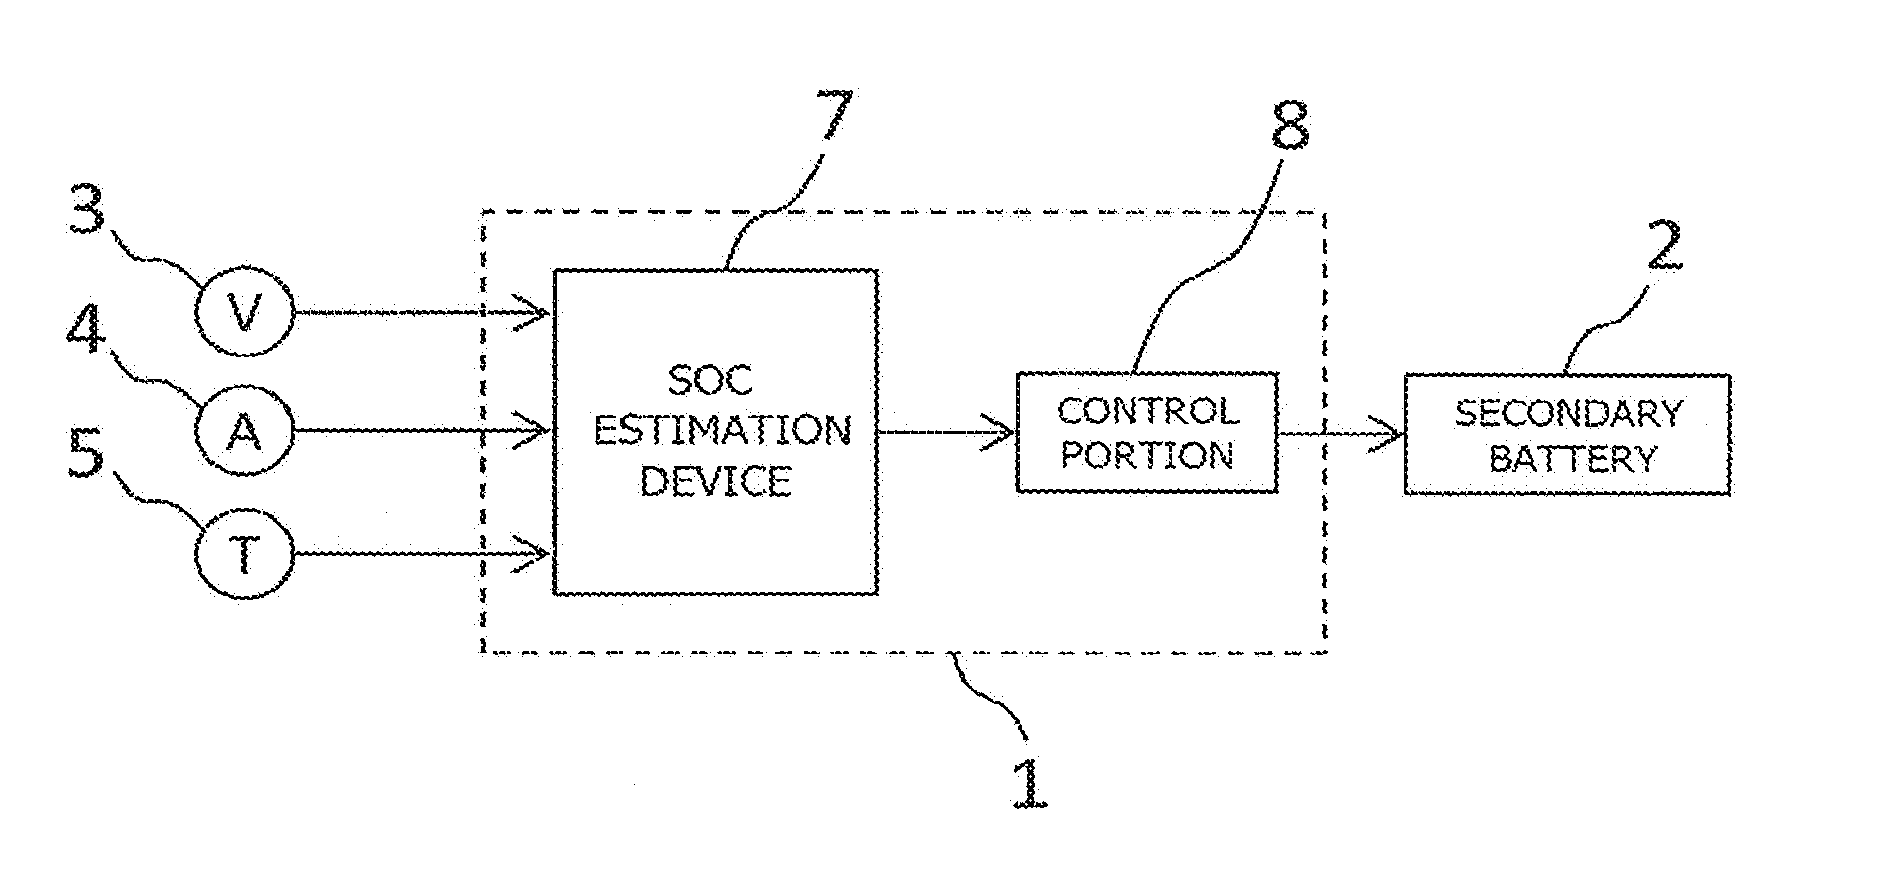 Soc estimation device for secondary battery